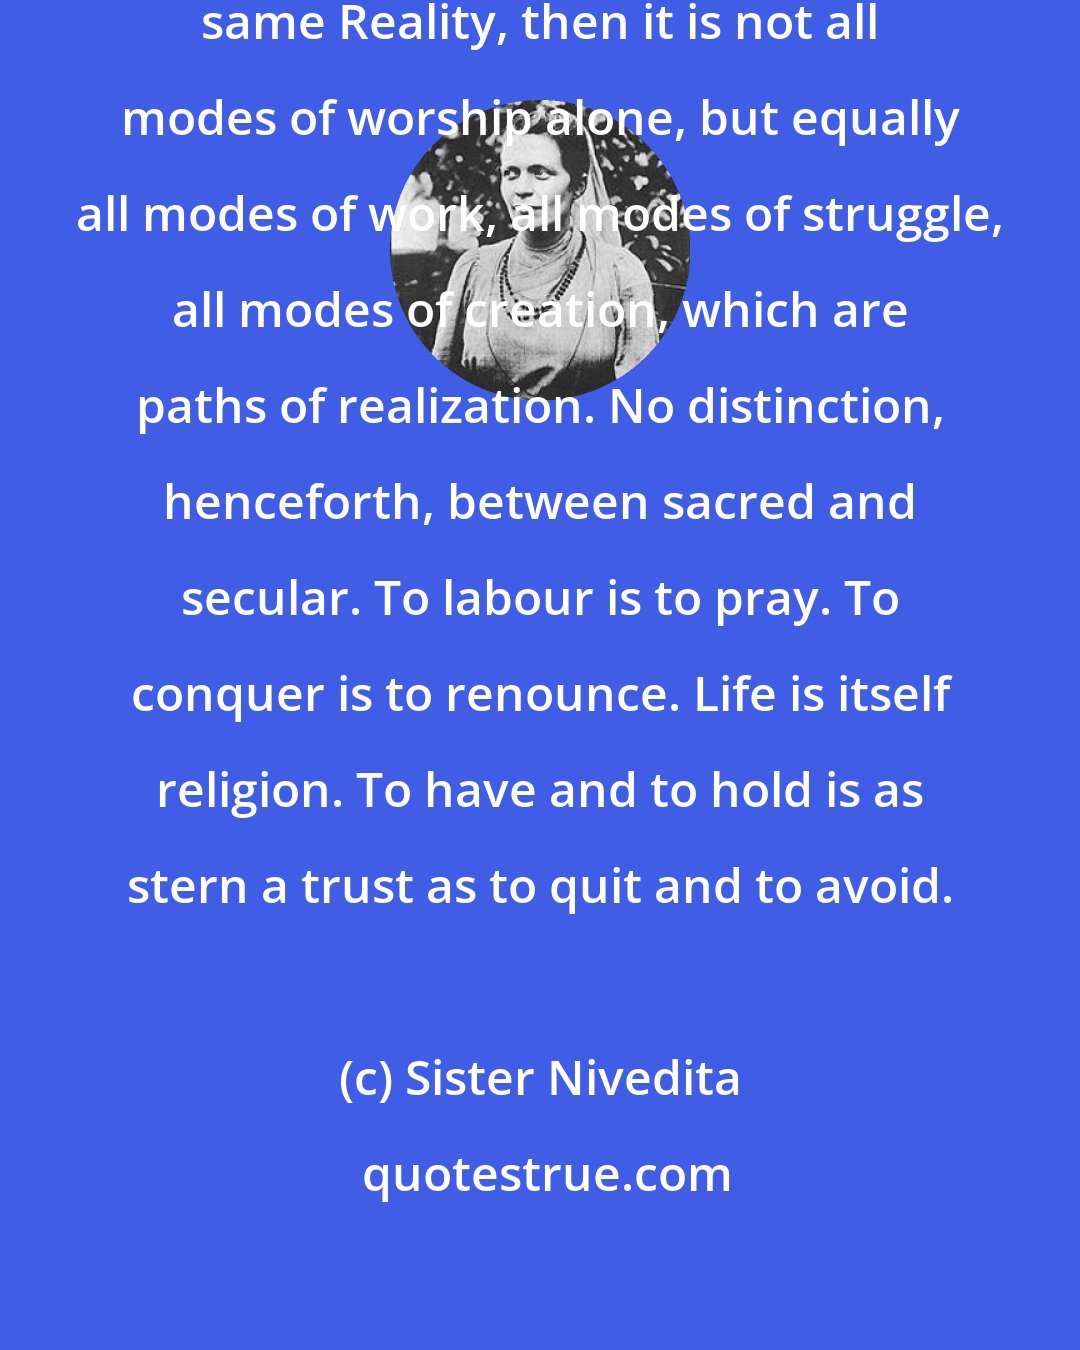 Sister Nivedita: If the many and the One be indeed the same Reality, then it is not all modes of worship alone, but equally all modes of work, all modes of struggle, all modes of creation, which are paths of realization. No distinction, henceforth, between sacred and secular. To labour is to pray. To conquer is to renounce. Life is itself religion. To have and to hold is as stern a trust as to quit and to avoid.